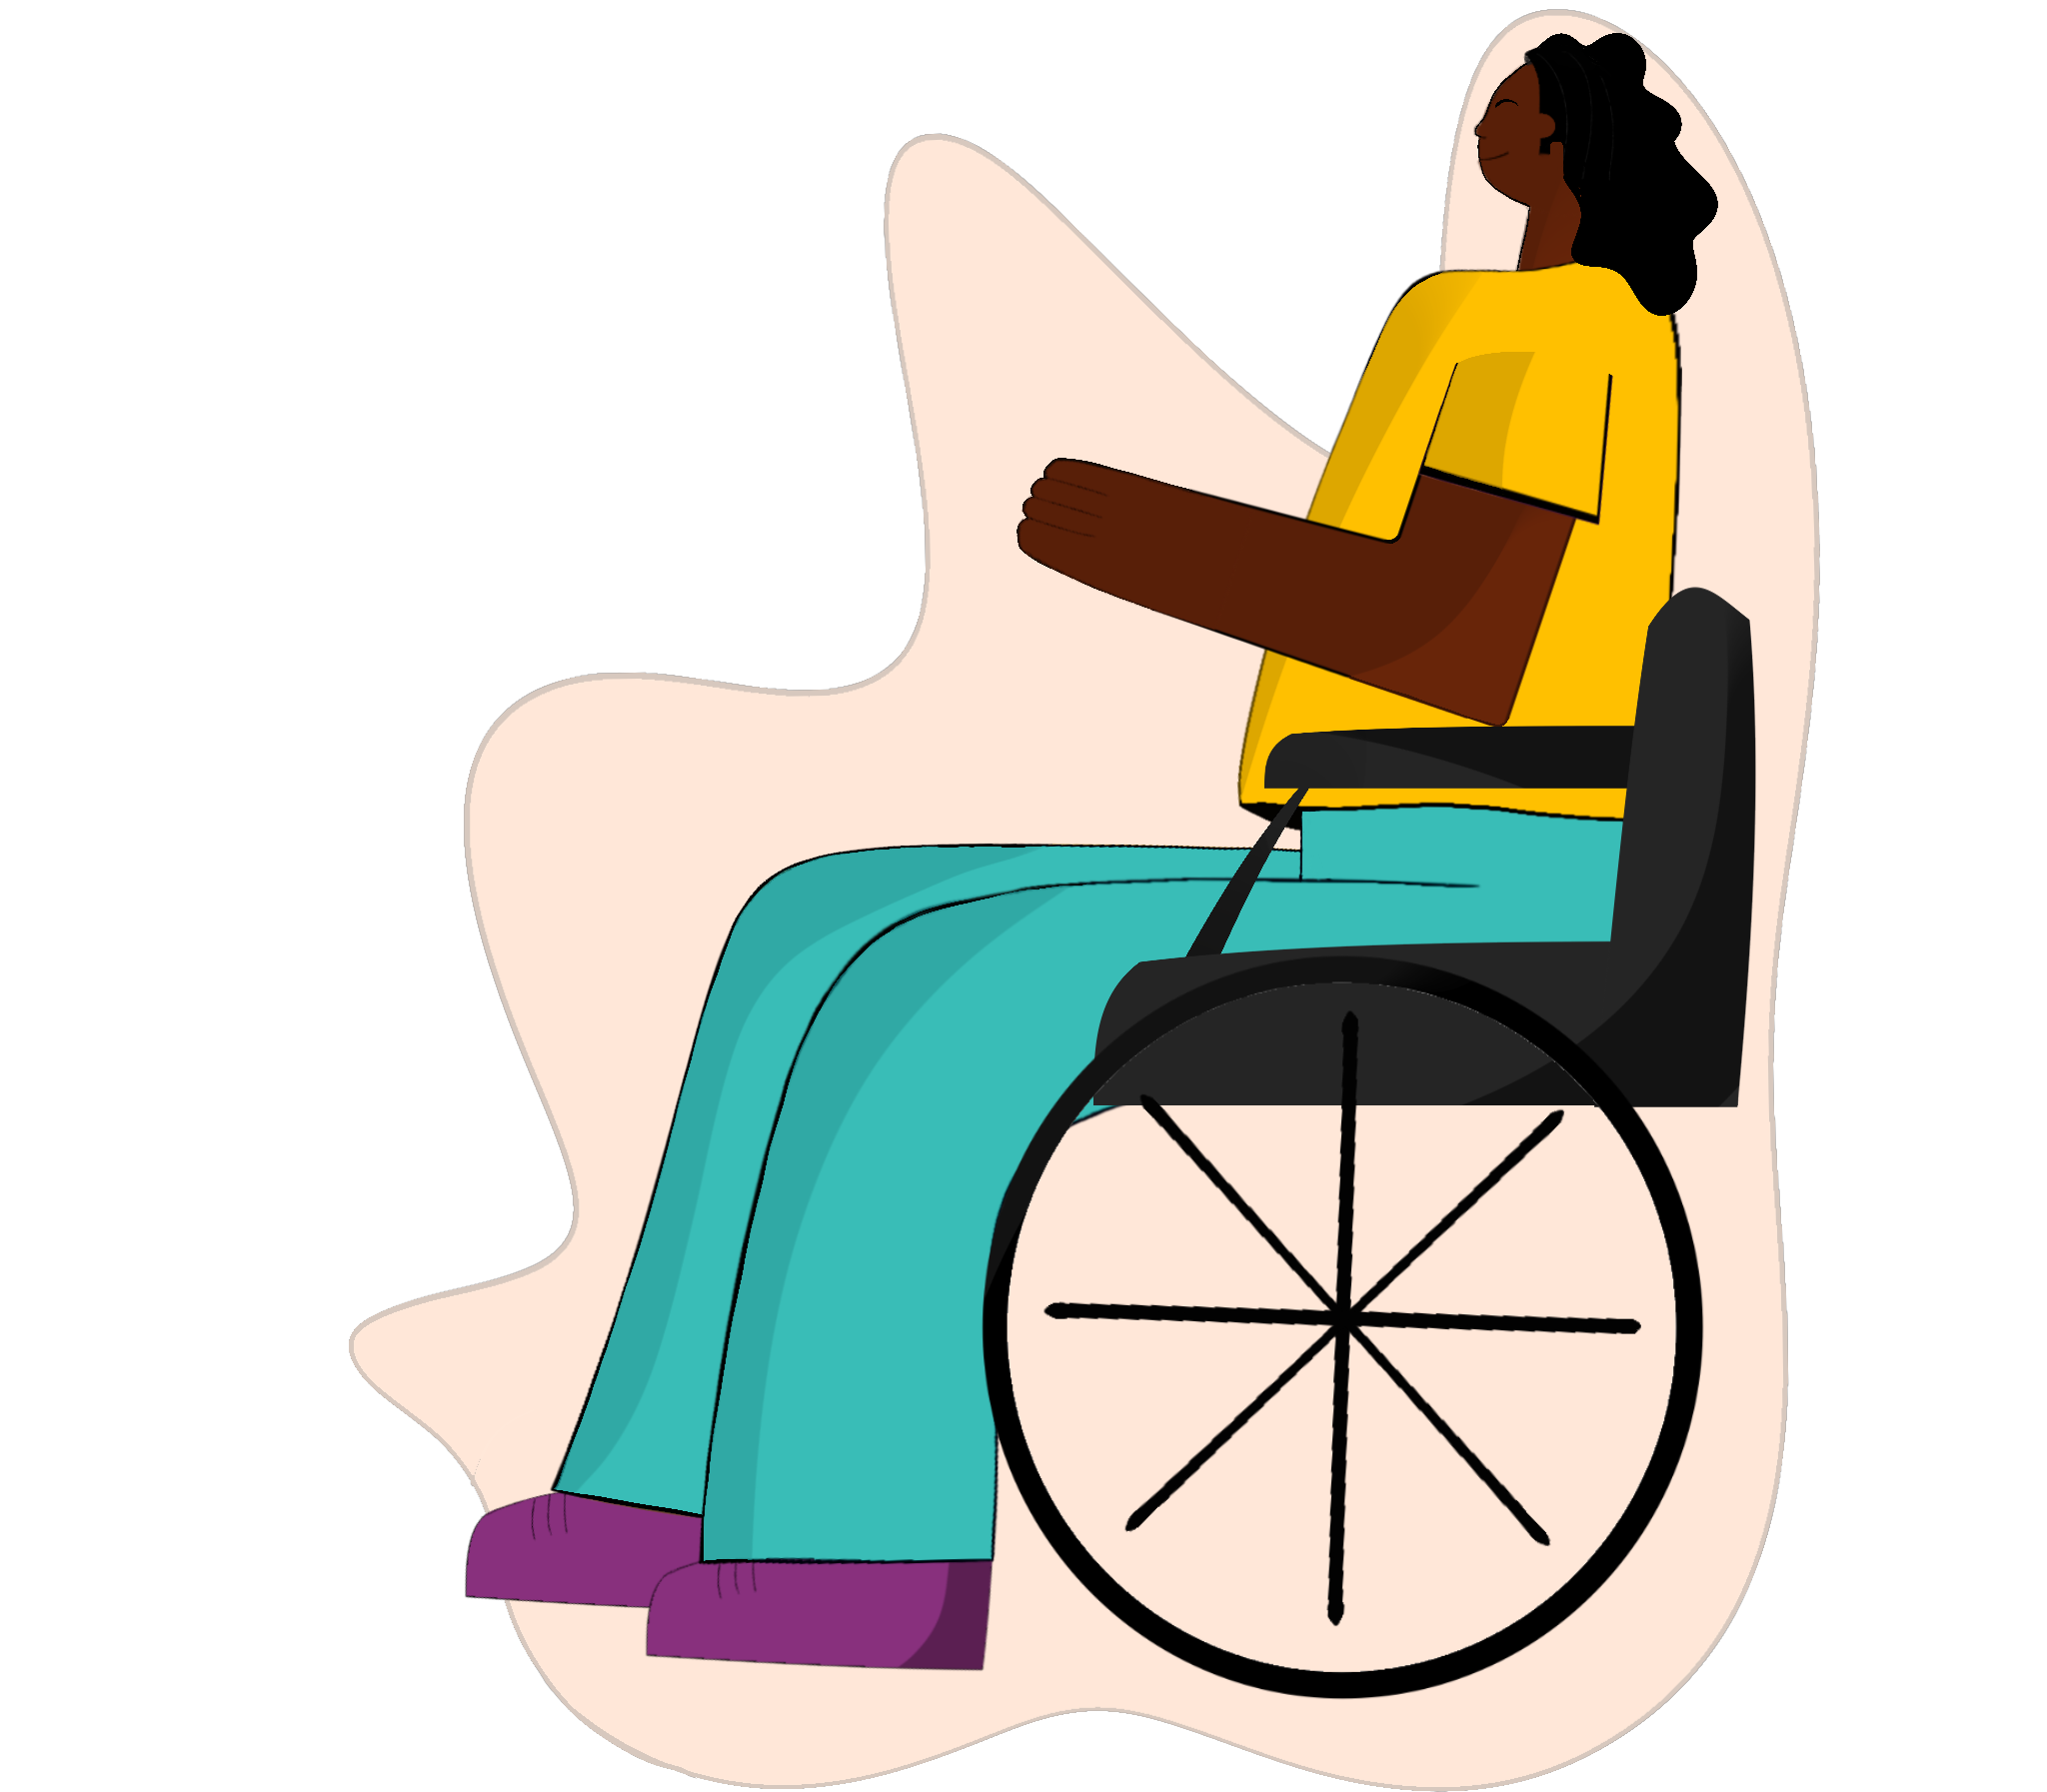 cartoon image of a young person using a wheelchair